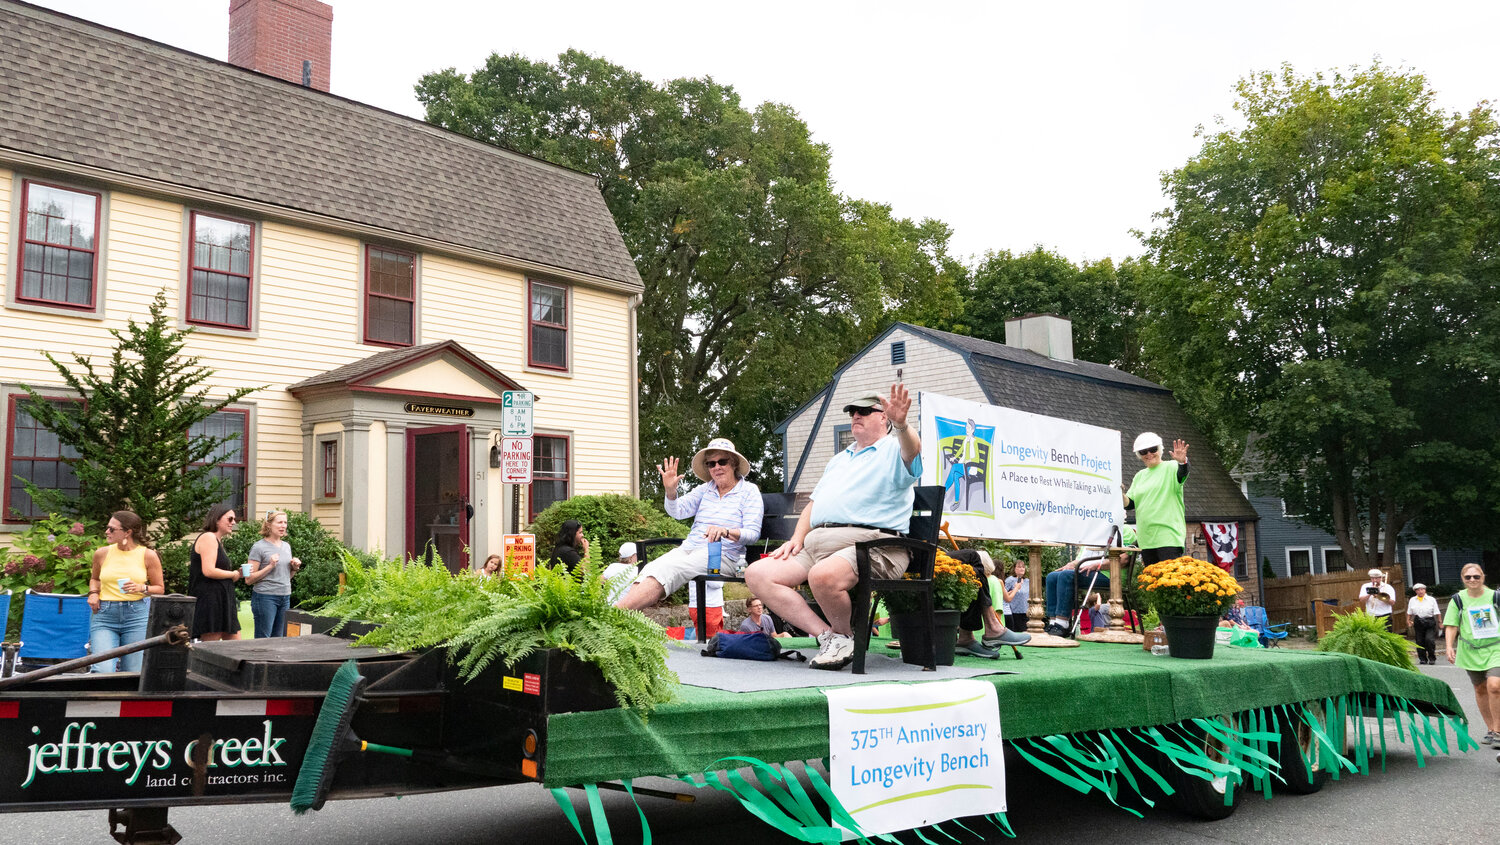 Longevity Bench float, which took “Most Ecological” award. 